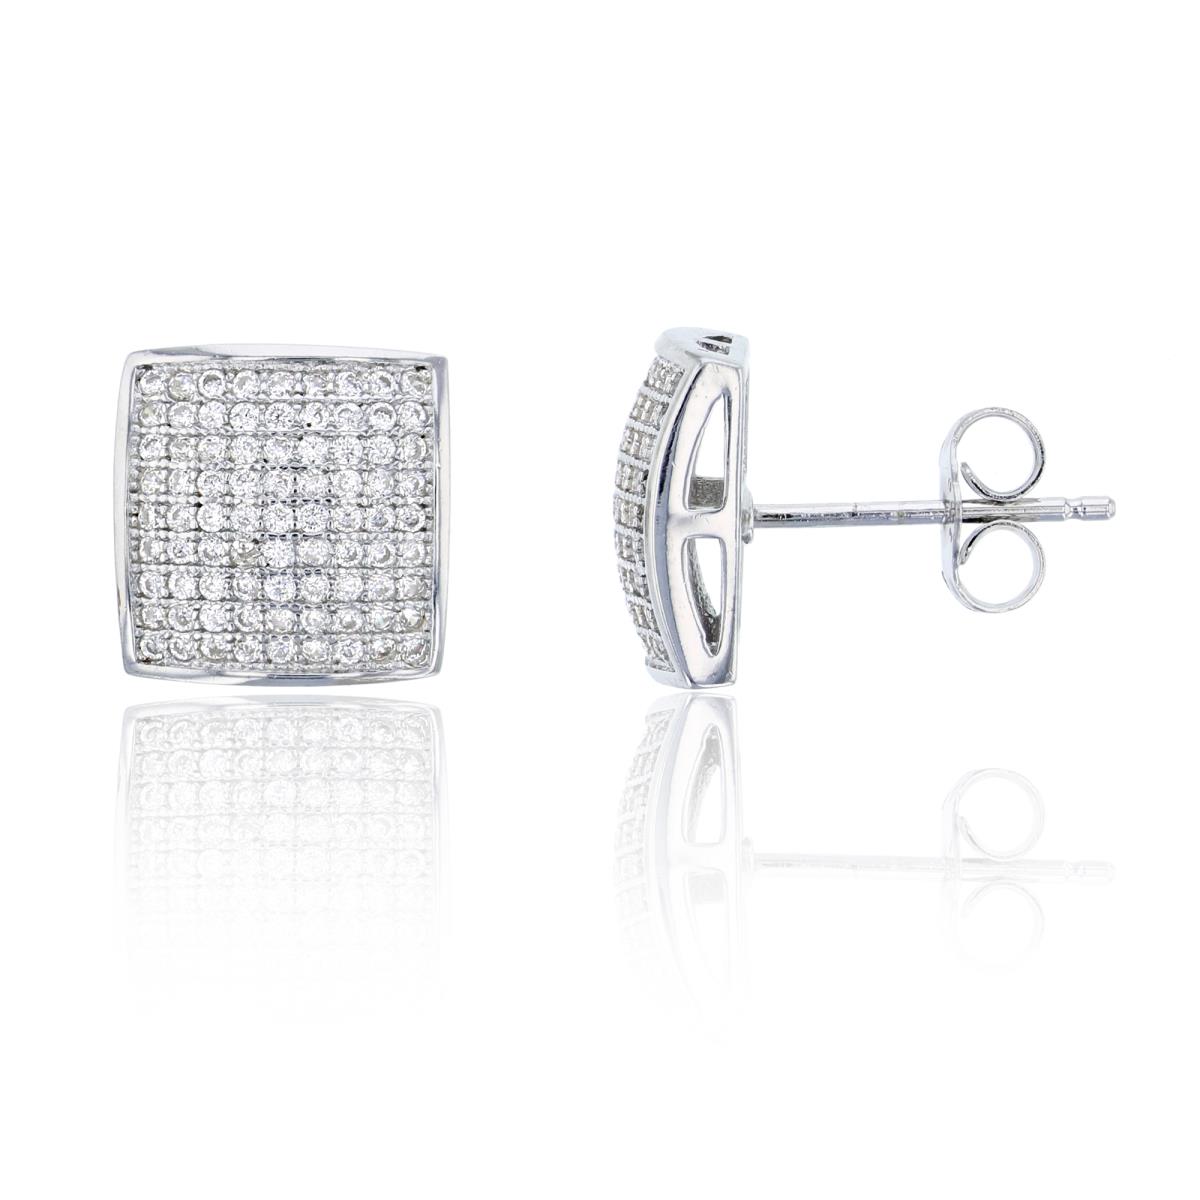 Sterling Silver 11x11mm Domed Square Micropave Stud Earring